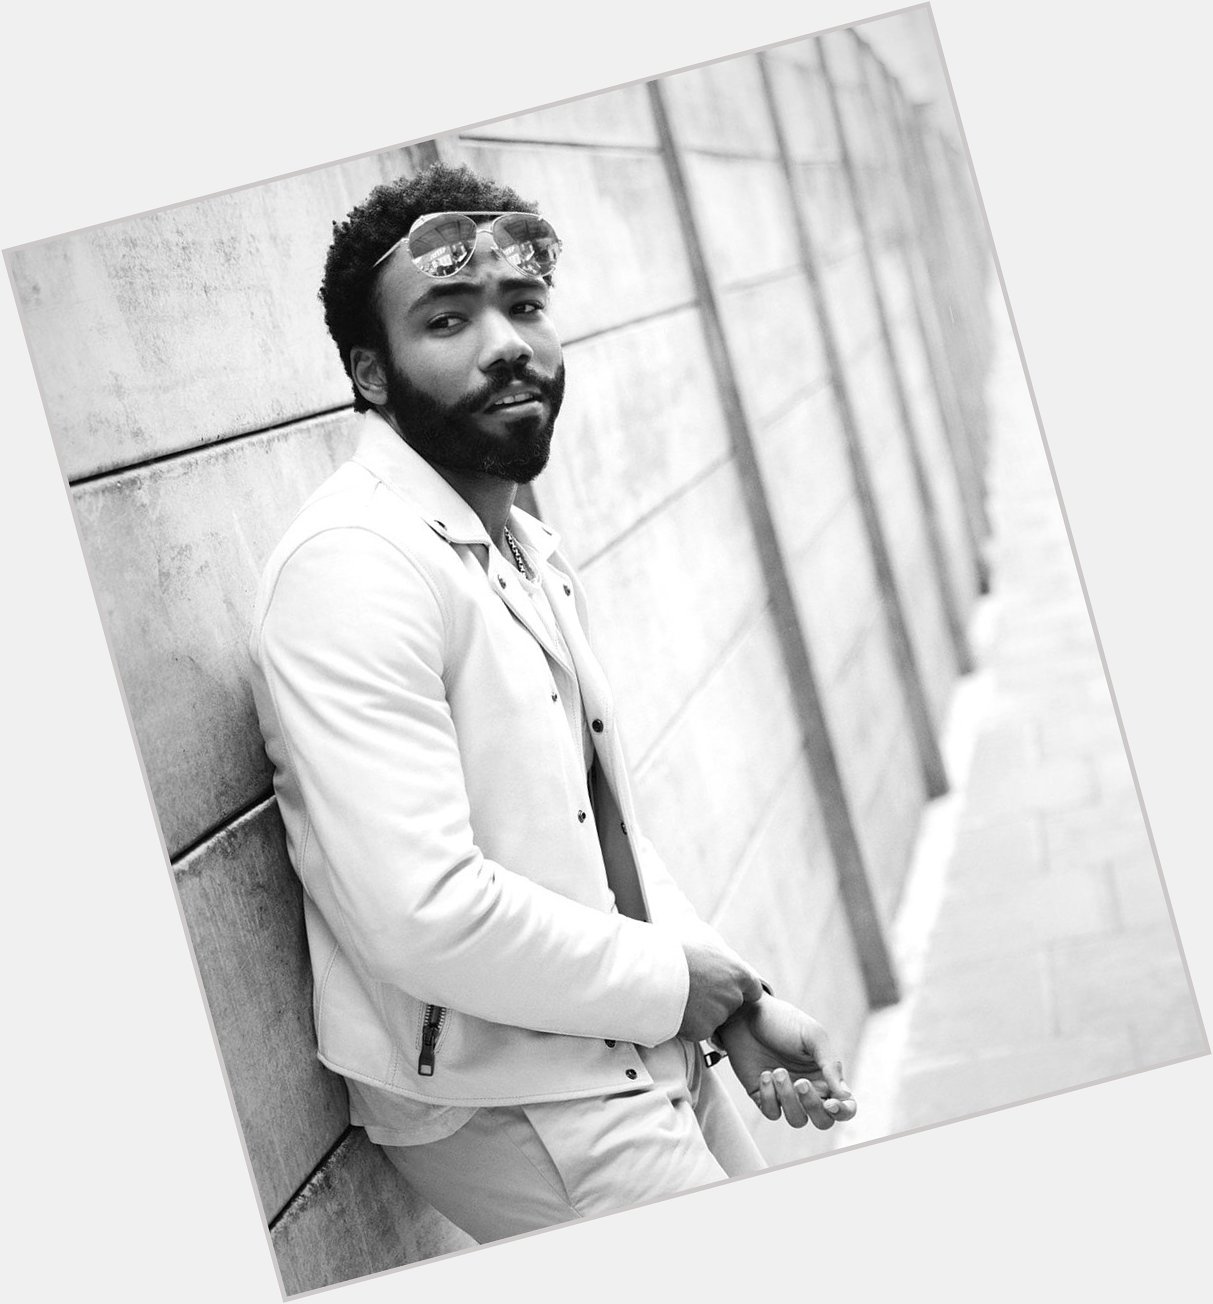 Happy 34th birthday to the amazingly talented Donald Glover  